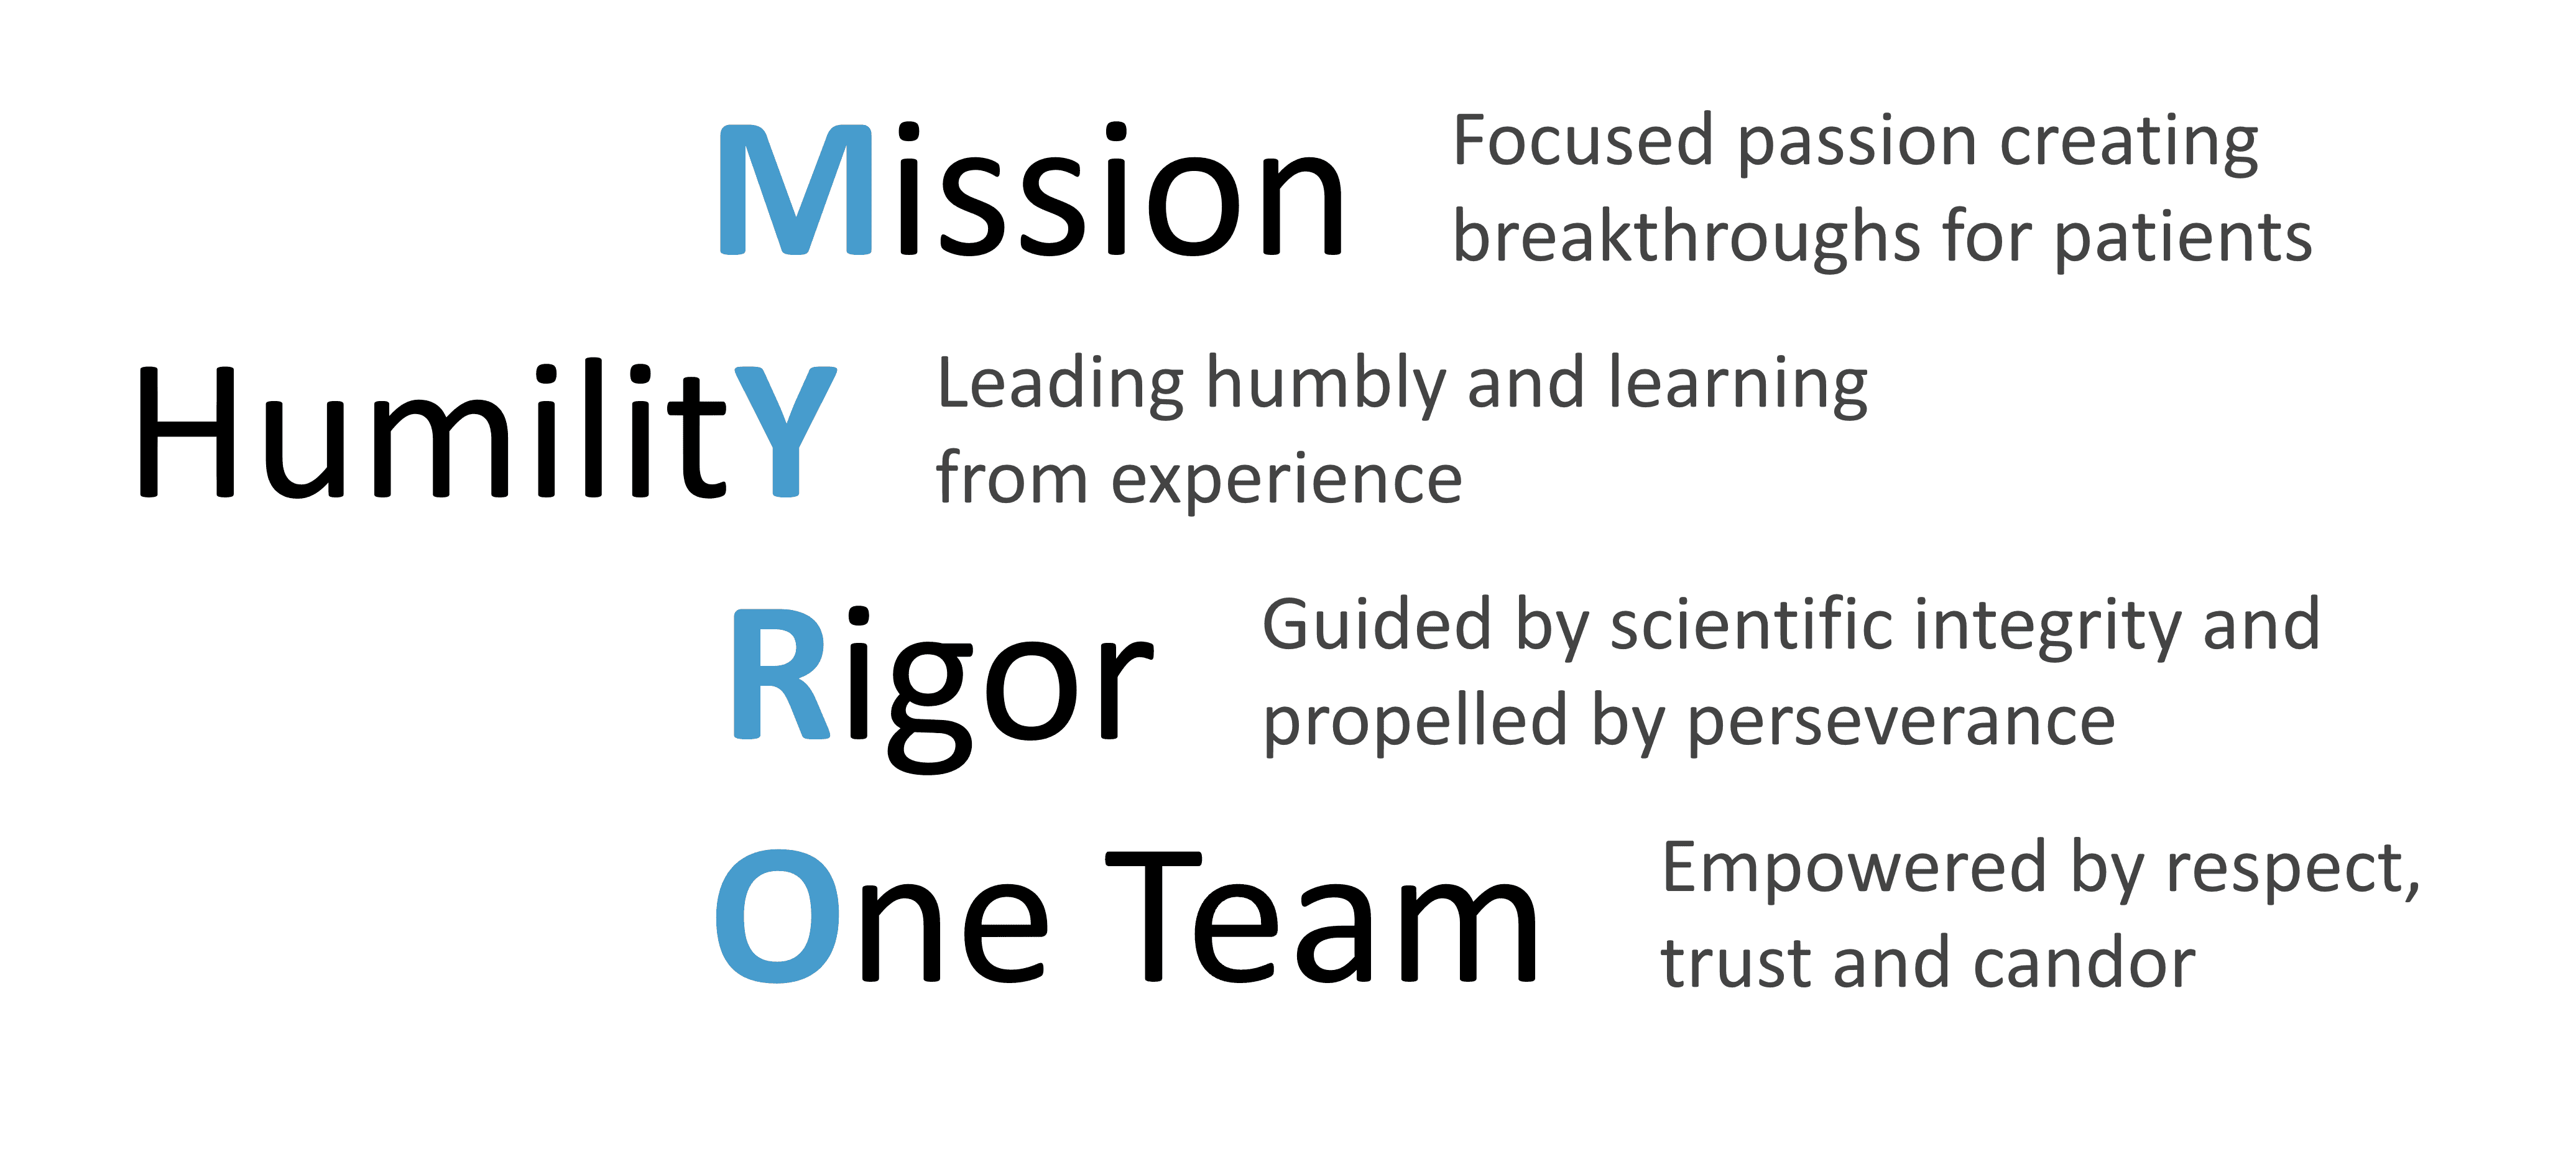 Our values: Mission, humilitY, Rigor, One team